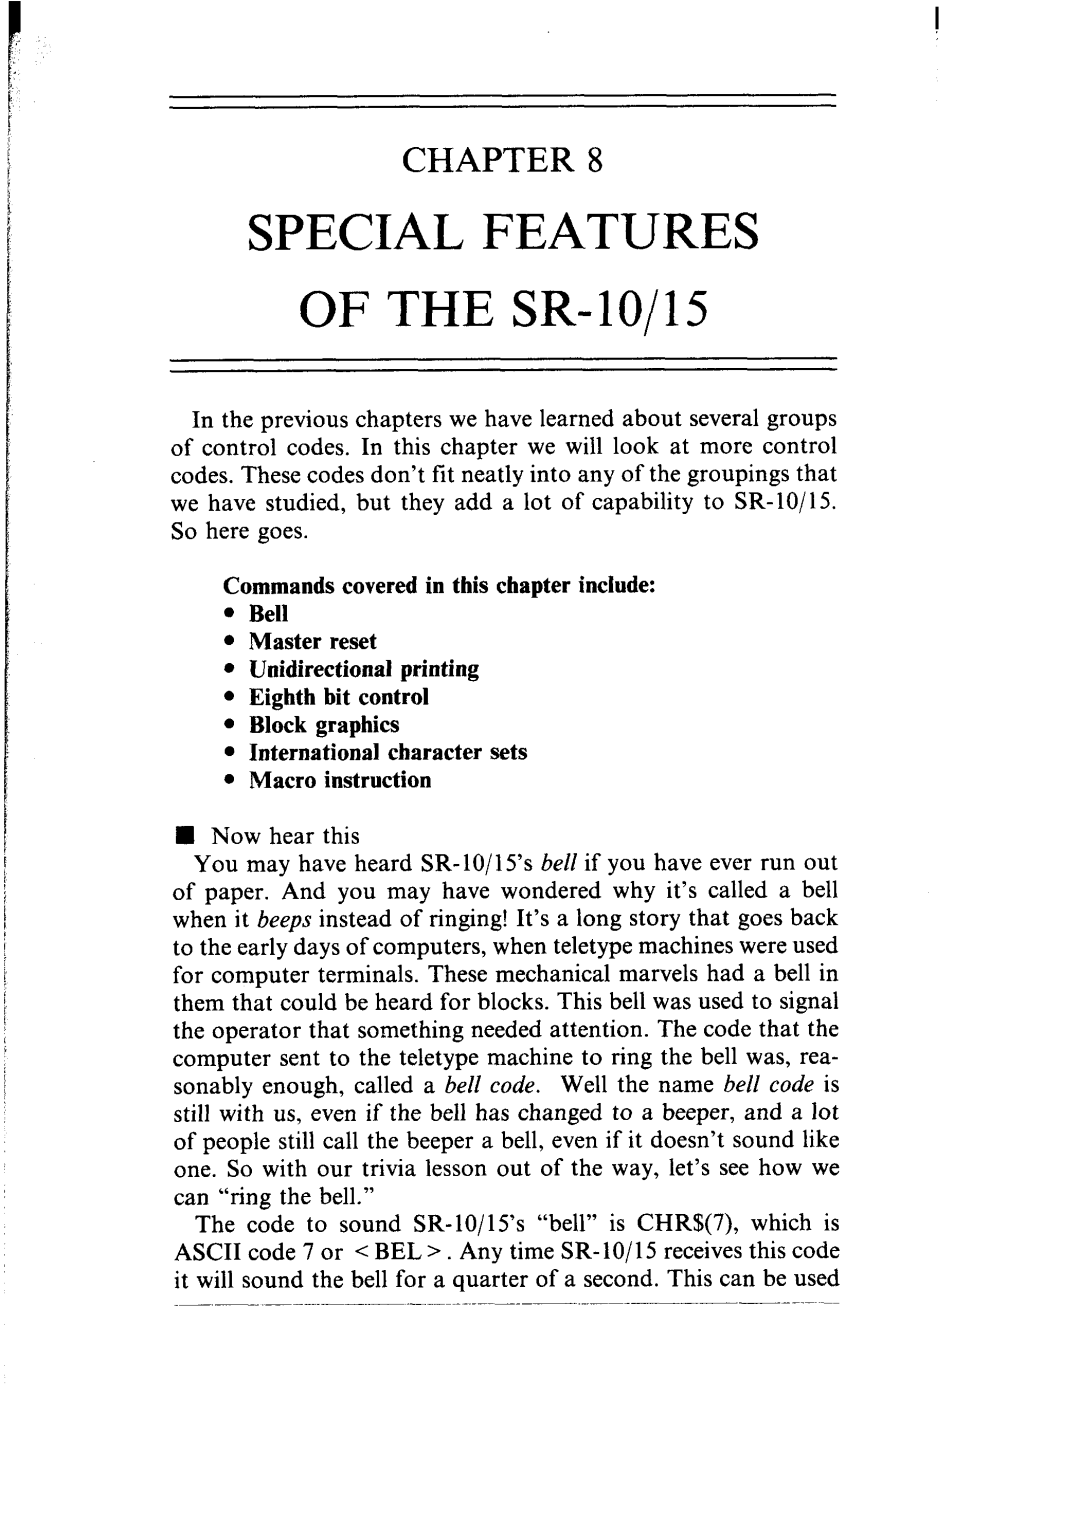 Star Micronics SR-10/I5 SPECIAL FEATURES OF THE SR-lo/15, Commands covered in this chapter include Bell Master reset 